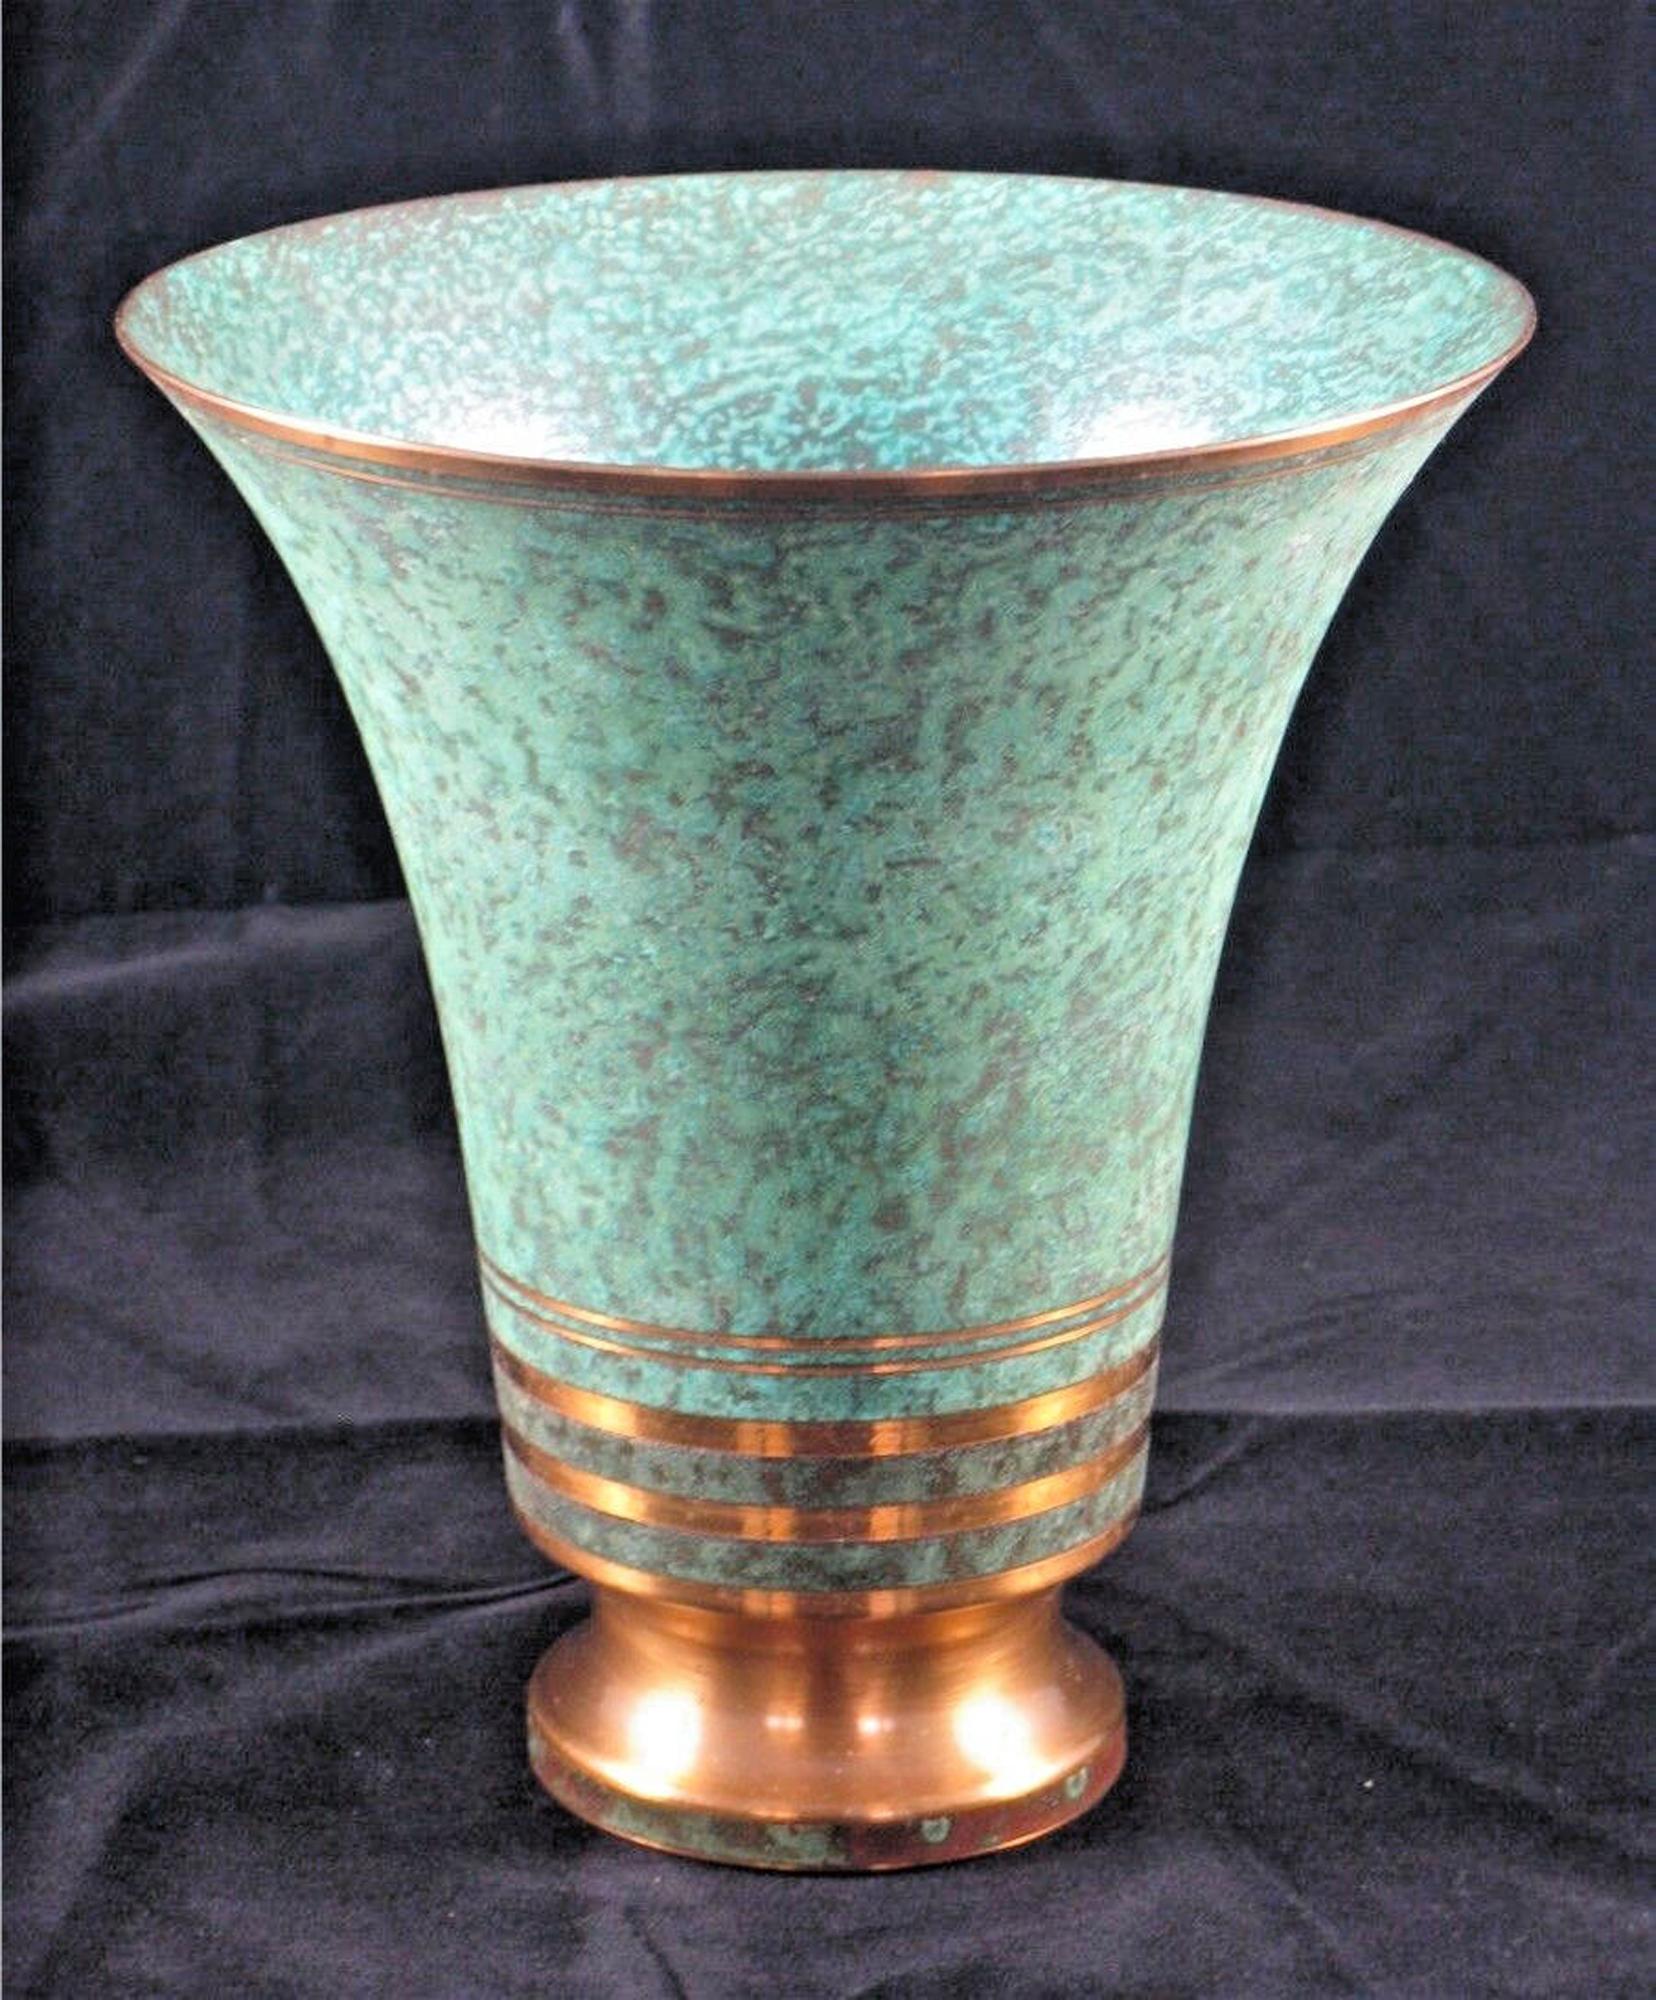 Carl Sorensen Bronze Vase,
Arts and Crafts Movement,
Philadelphia, PA,
Early 1900s

The copper and bronze vase with a flared top is finished in a verdigris patina.

Dimensions: 7 1/8 inches high x 5 7/8 inch diameter

Mark: Signature on base

In